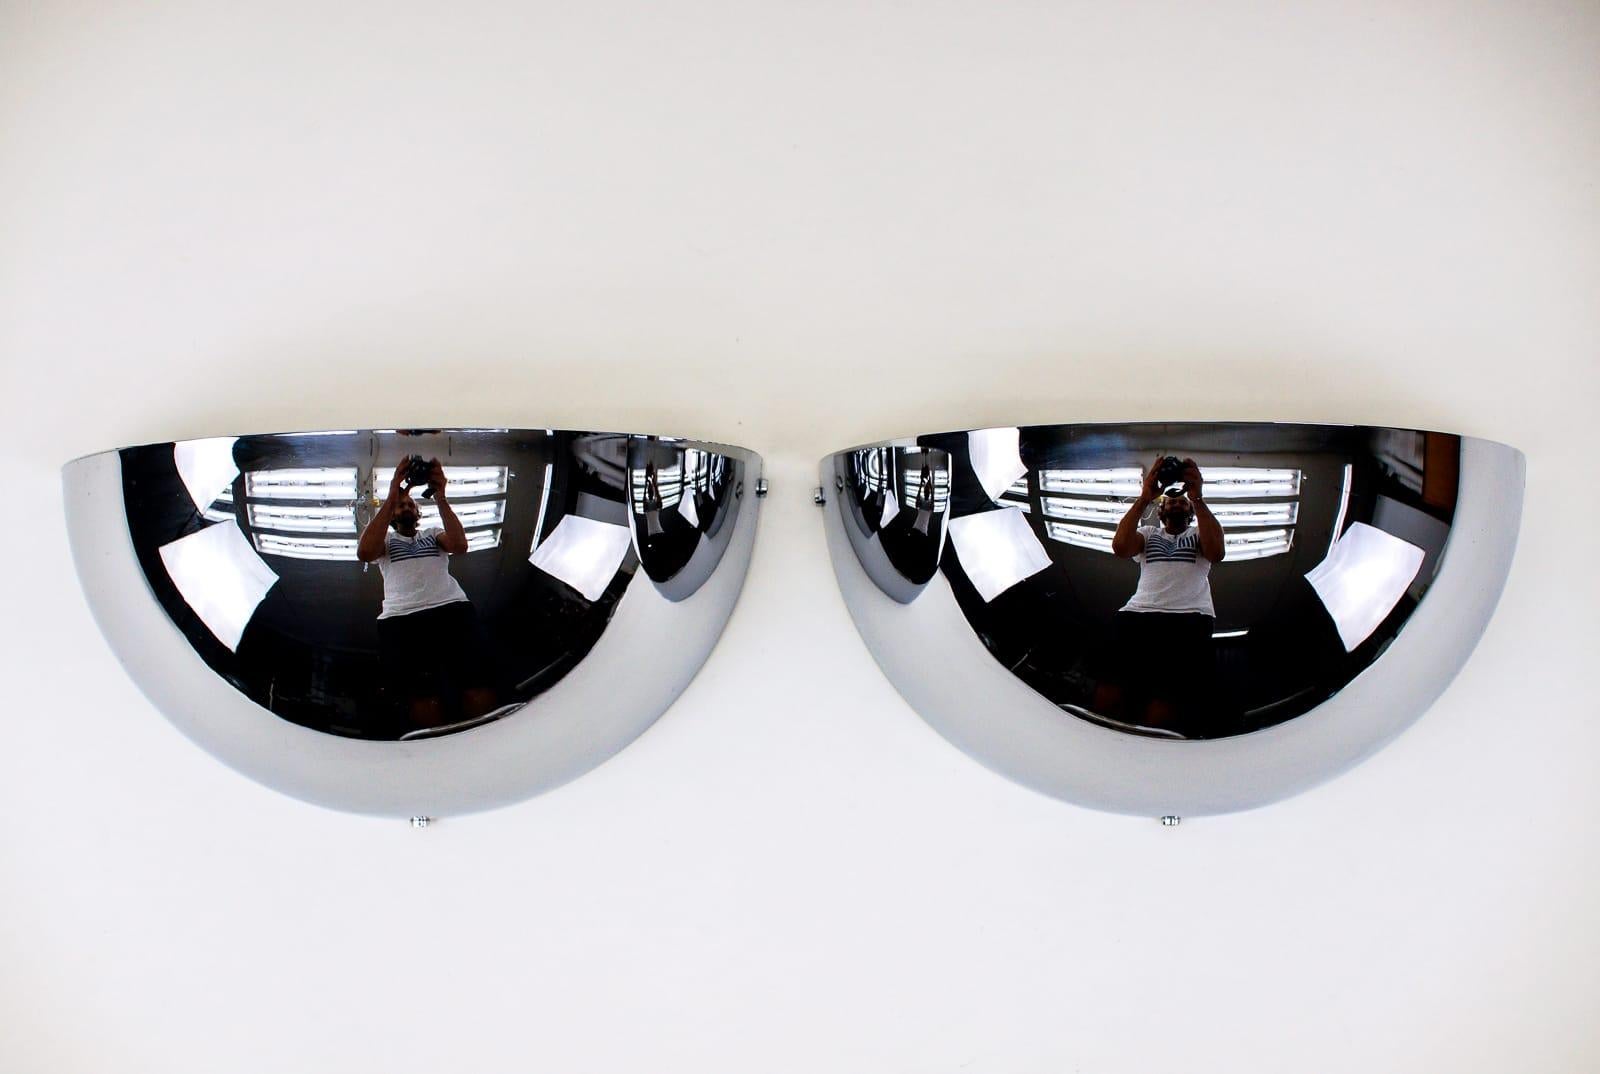 Pair of half round space age chrome wall lamps by LEOLA, 1970s Germany.

Very elegant.

Fully functional.

Each E27 socket. Works with 220V and 110V.

Wiring is suitable for all countries.